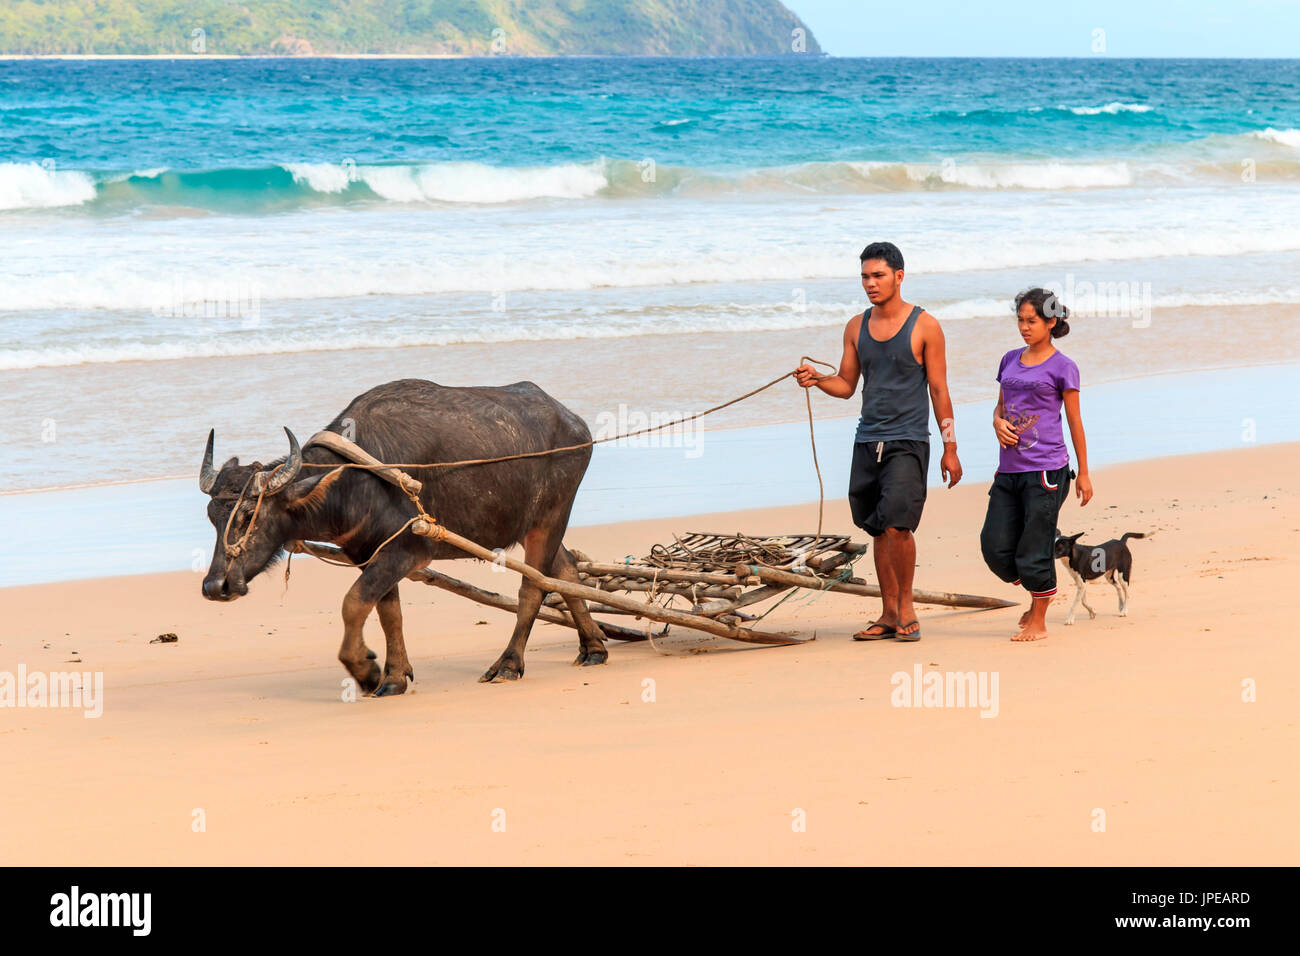 Nacpan, Philippines. Farmers of Nacpan walking on the beach with a Carabao, the water buffalo Stock Photo